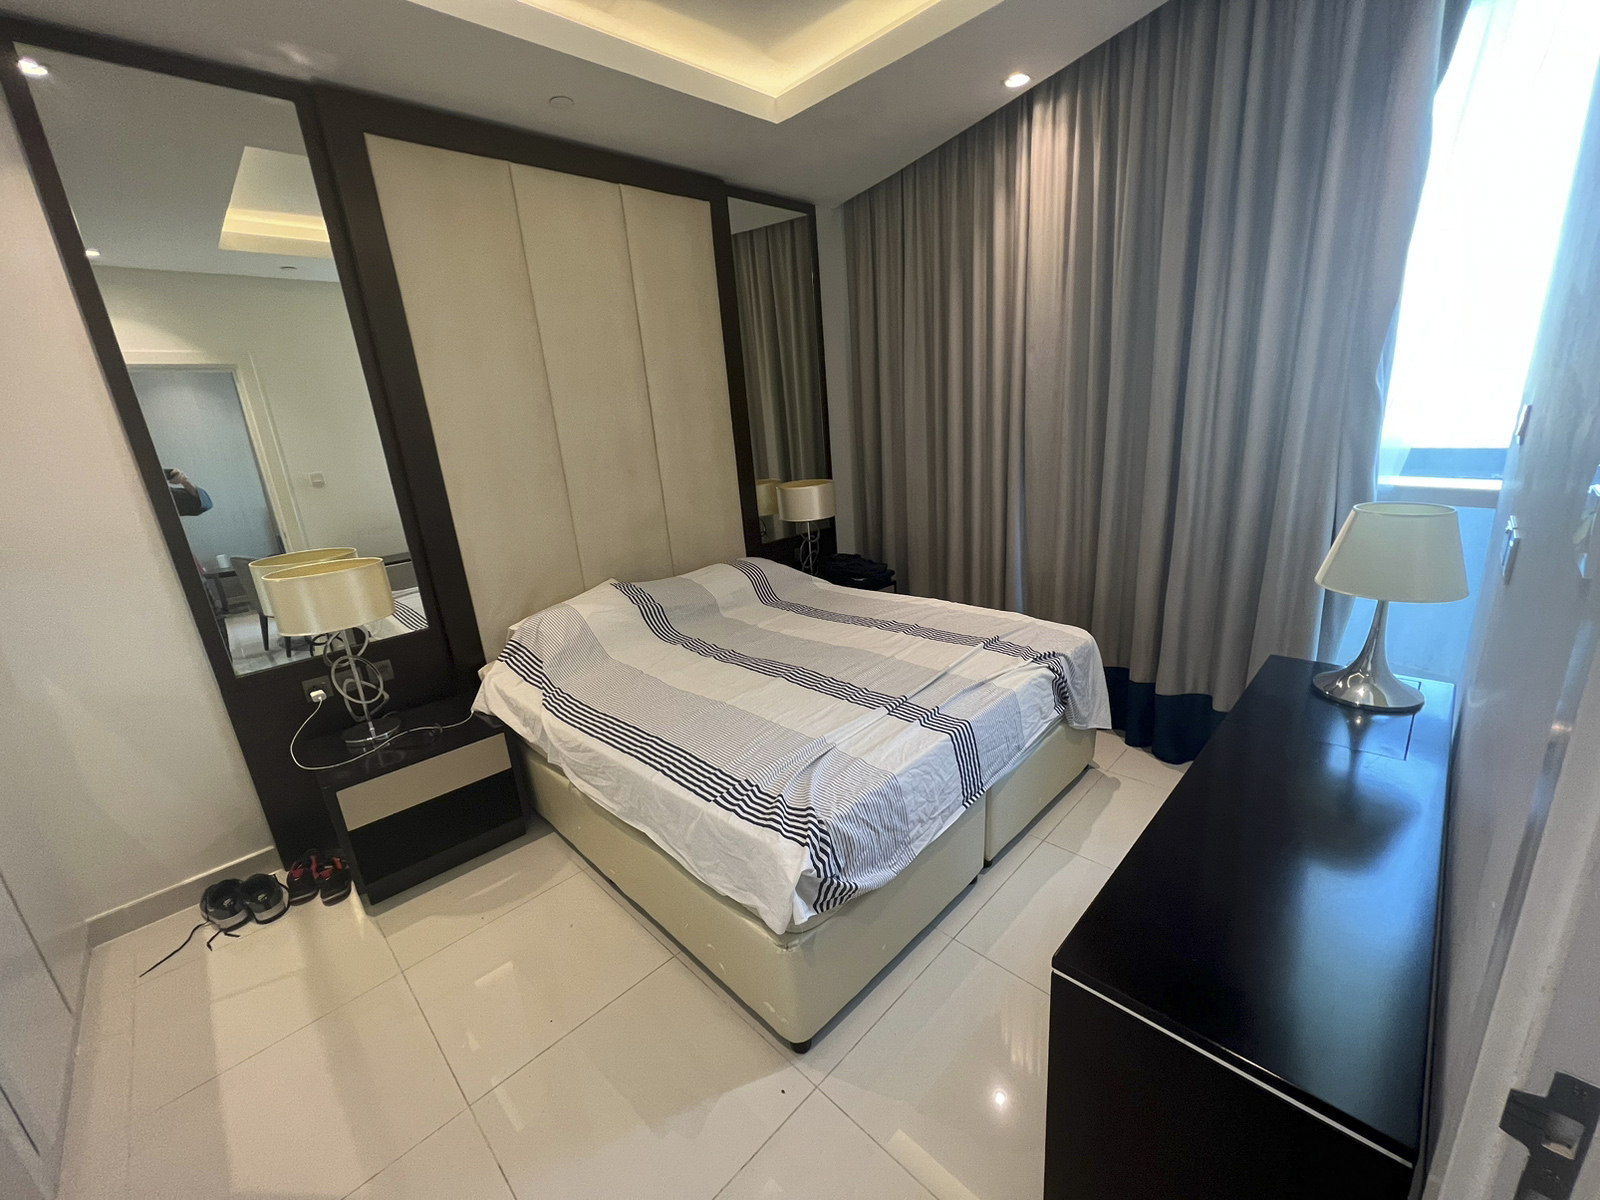 The Distinction Hotel Apartments